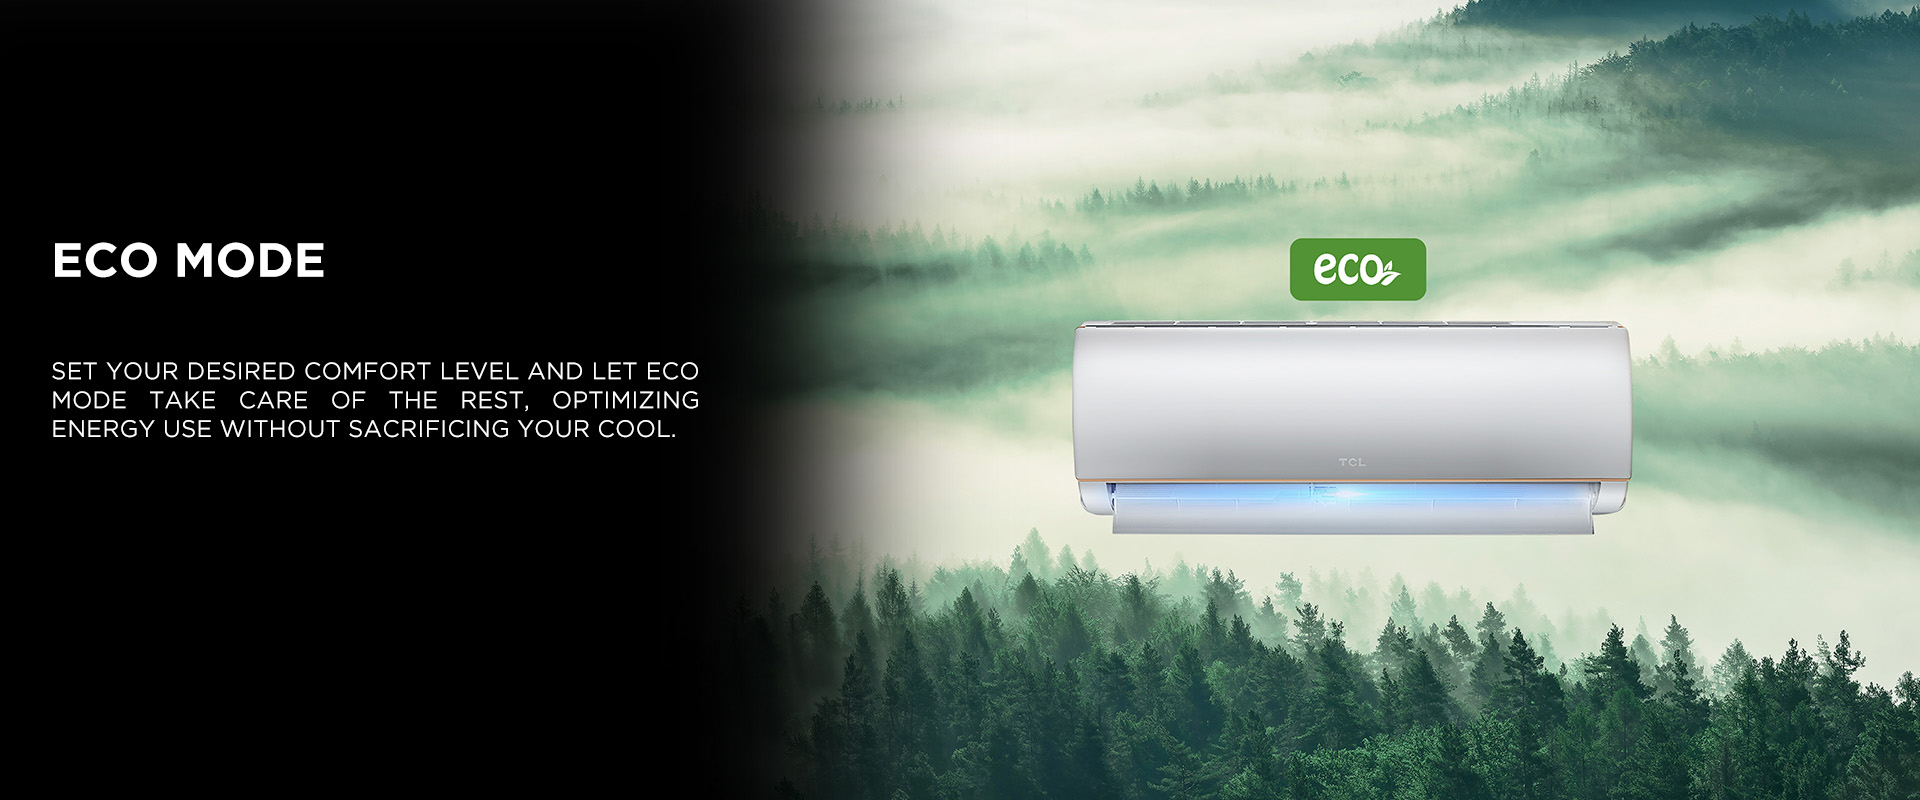 Set your desired comfort level and let Eco mode take care of the rest, optimizing energy use without sacrificing your cool.